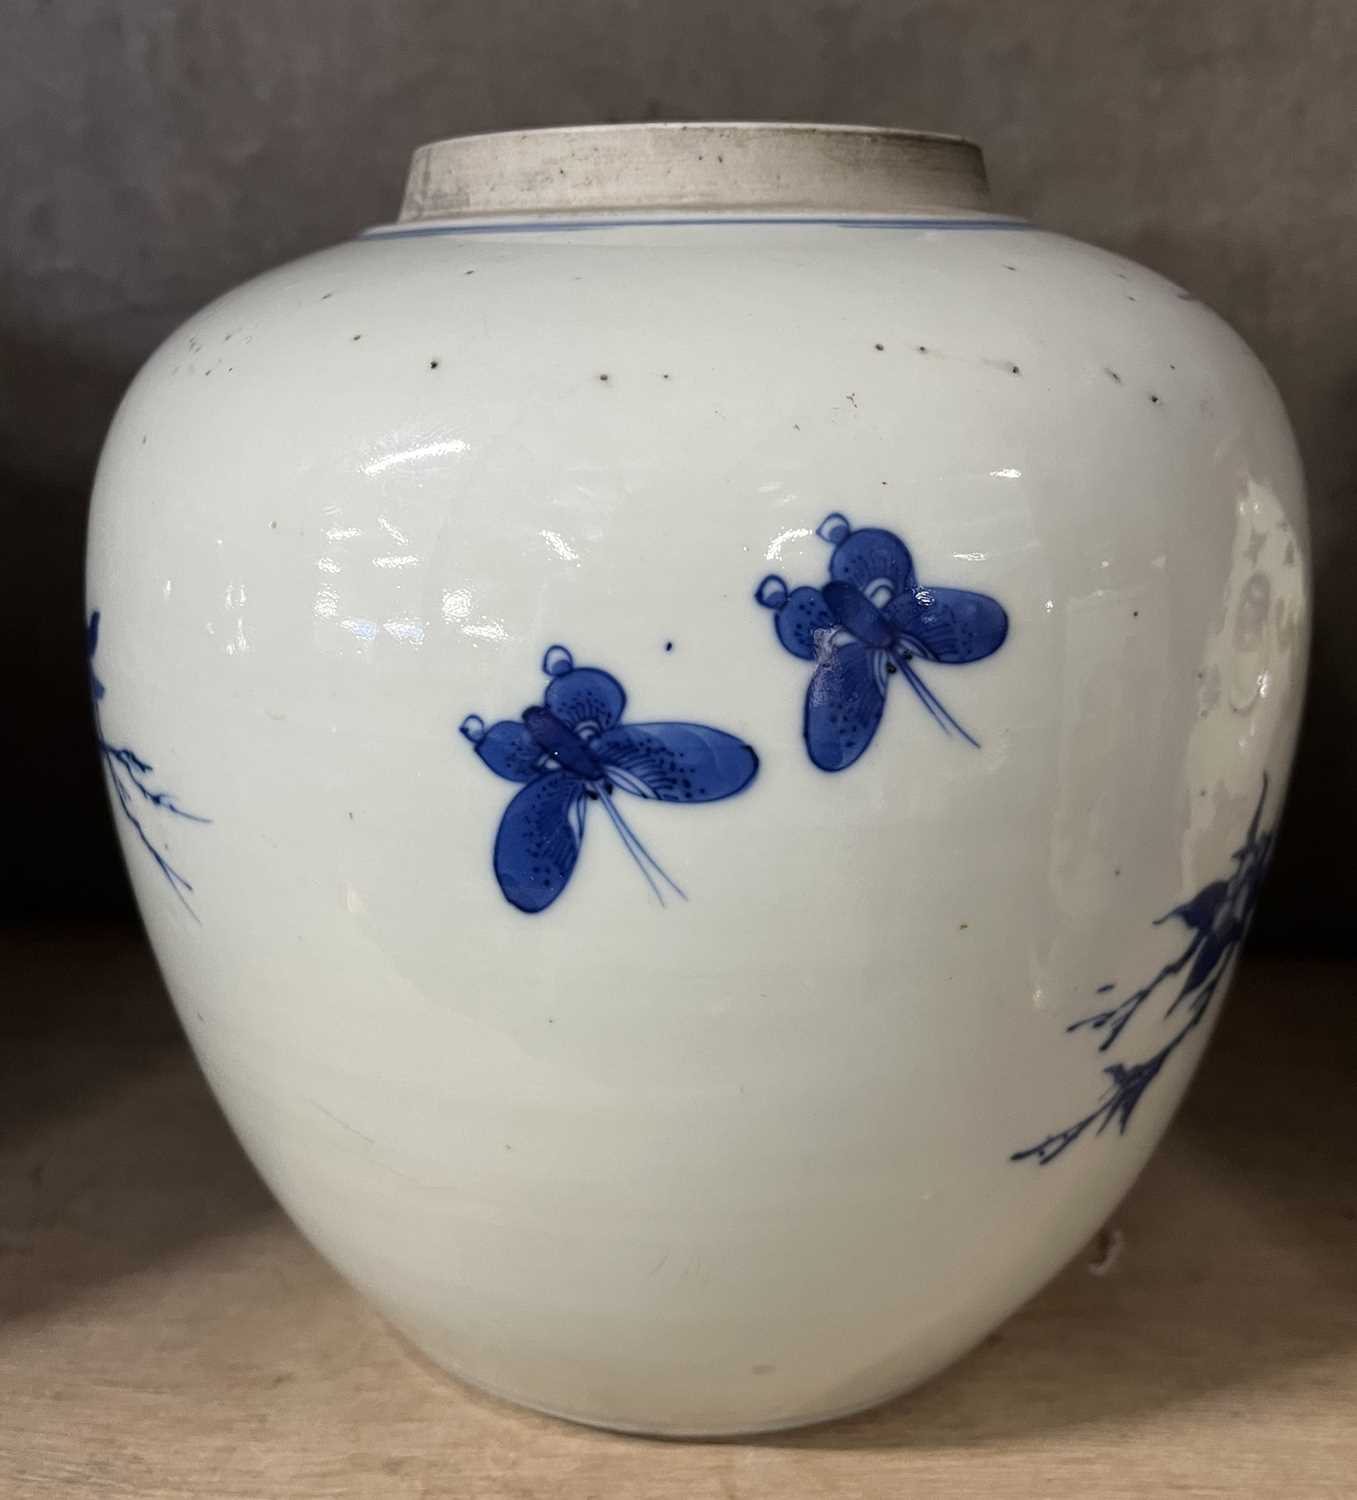 Qing Dynasty Chinese porcelain ginger jar (lacking cover), decorated in blue and white with birds on - Image 7 of 9